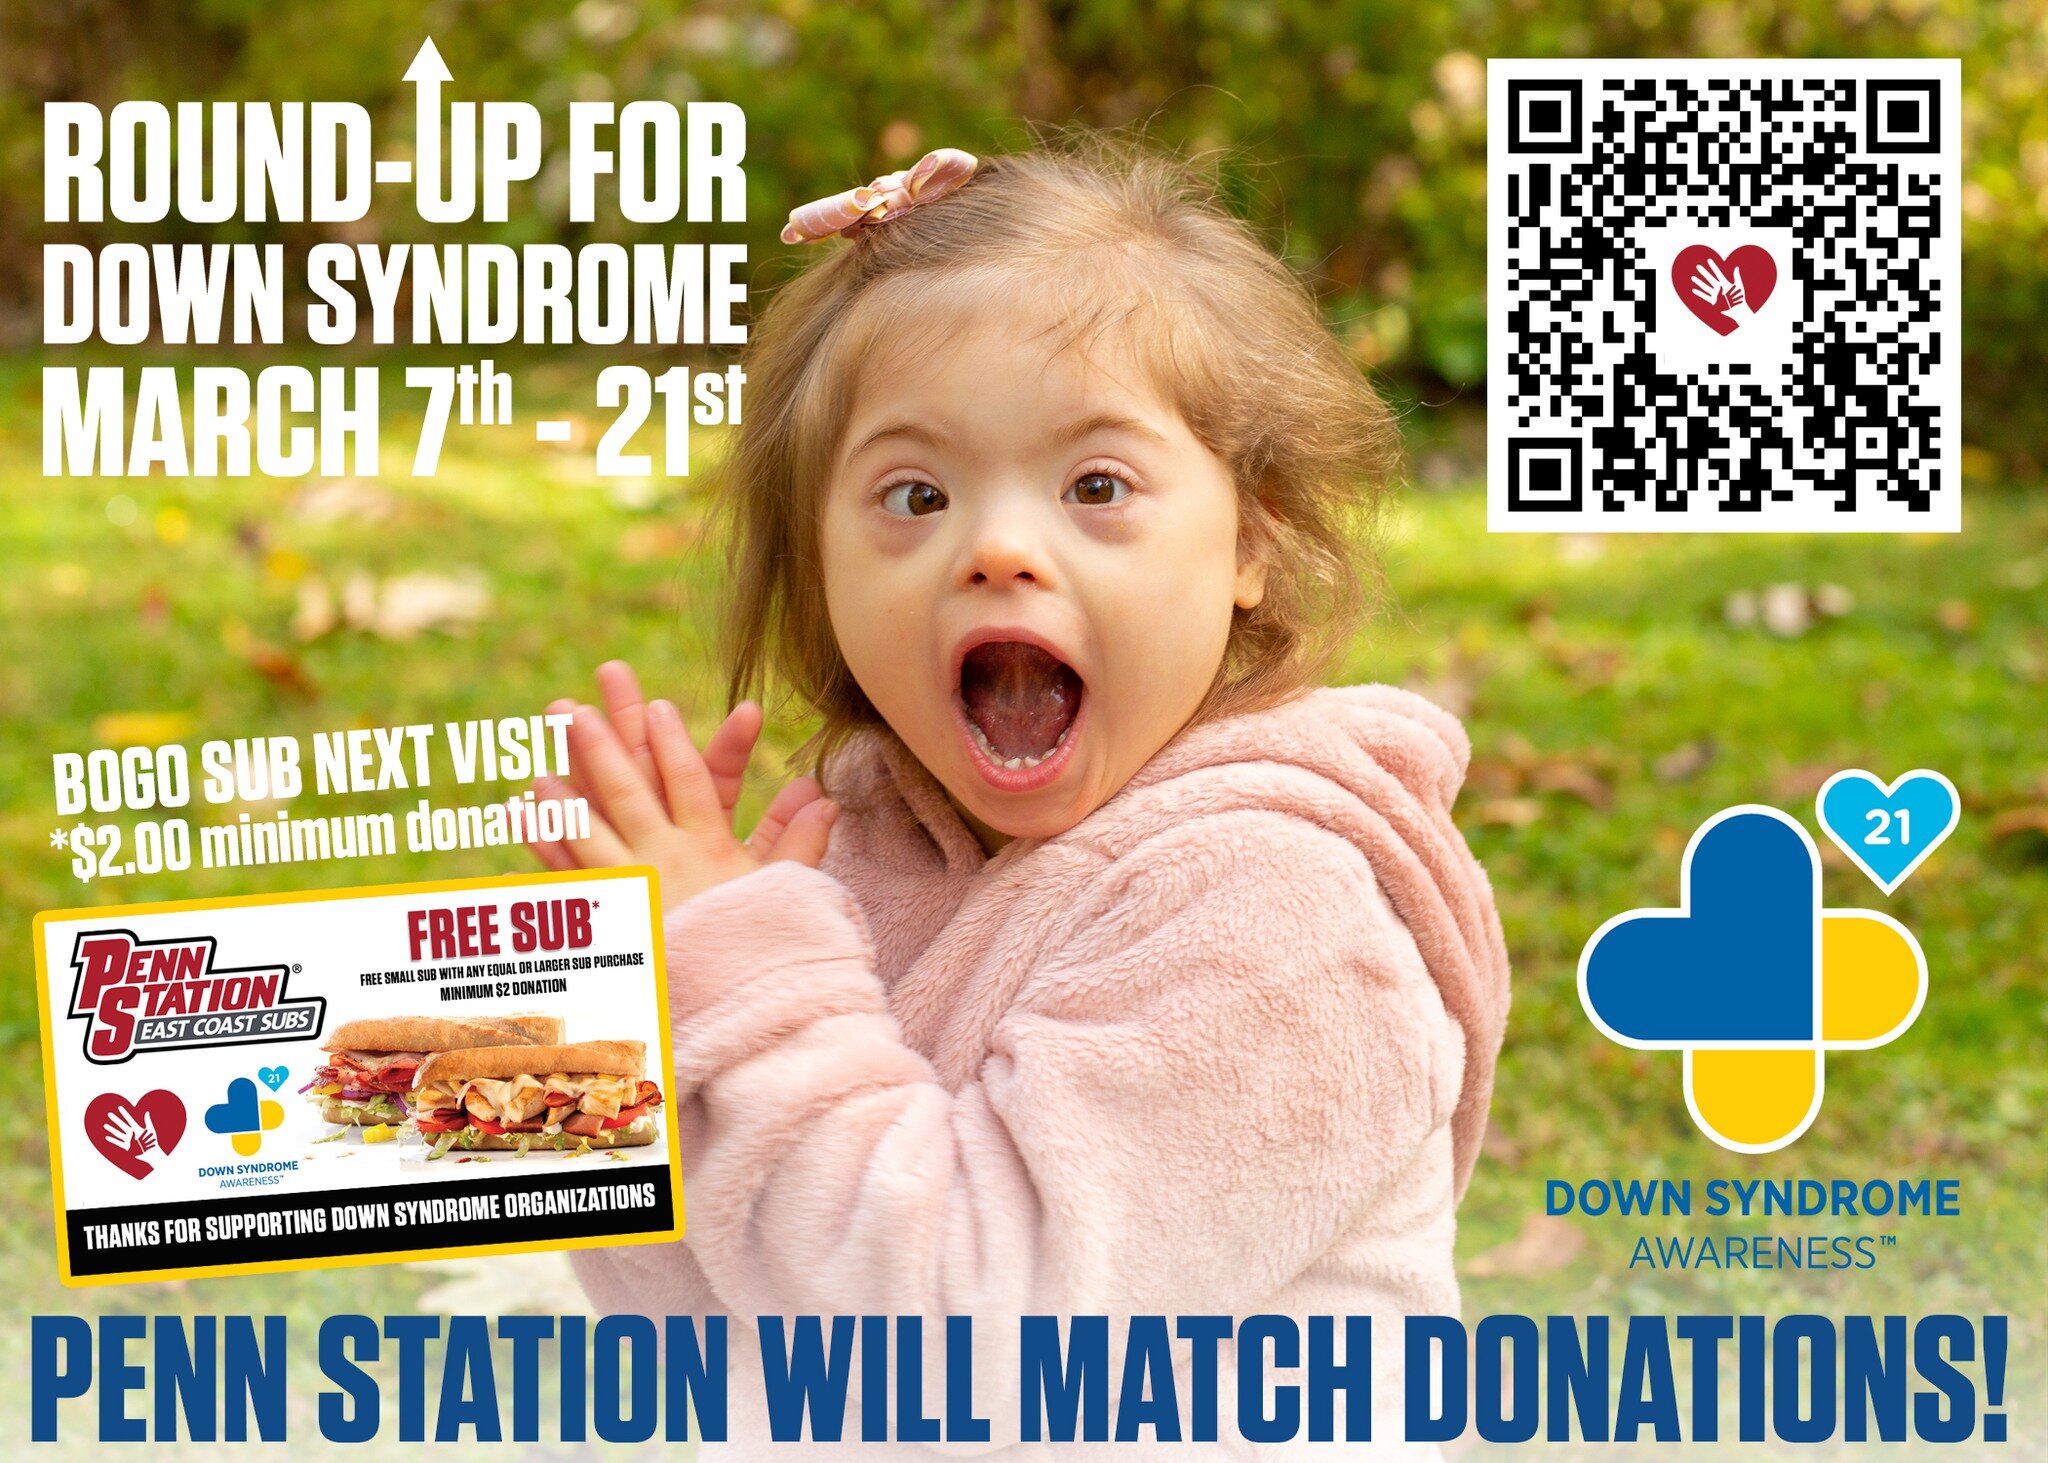 Don't forget, Penn Station's Round UP for Down Syndrome is happening now! Round UP to make a difference!